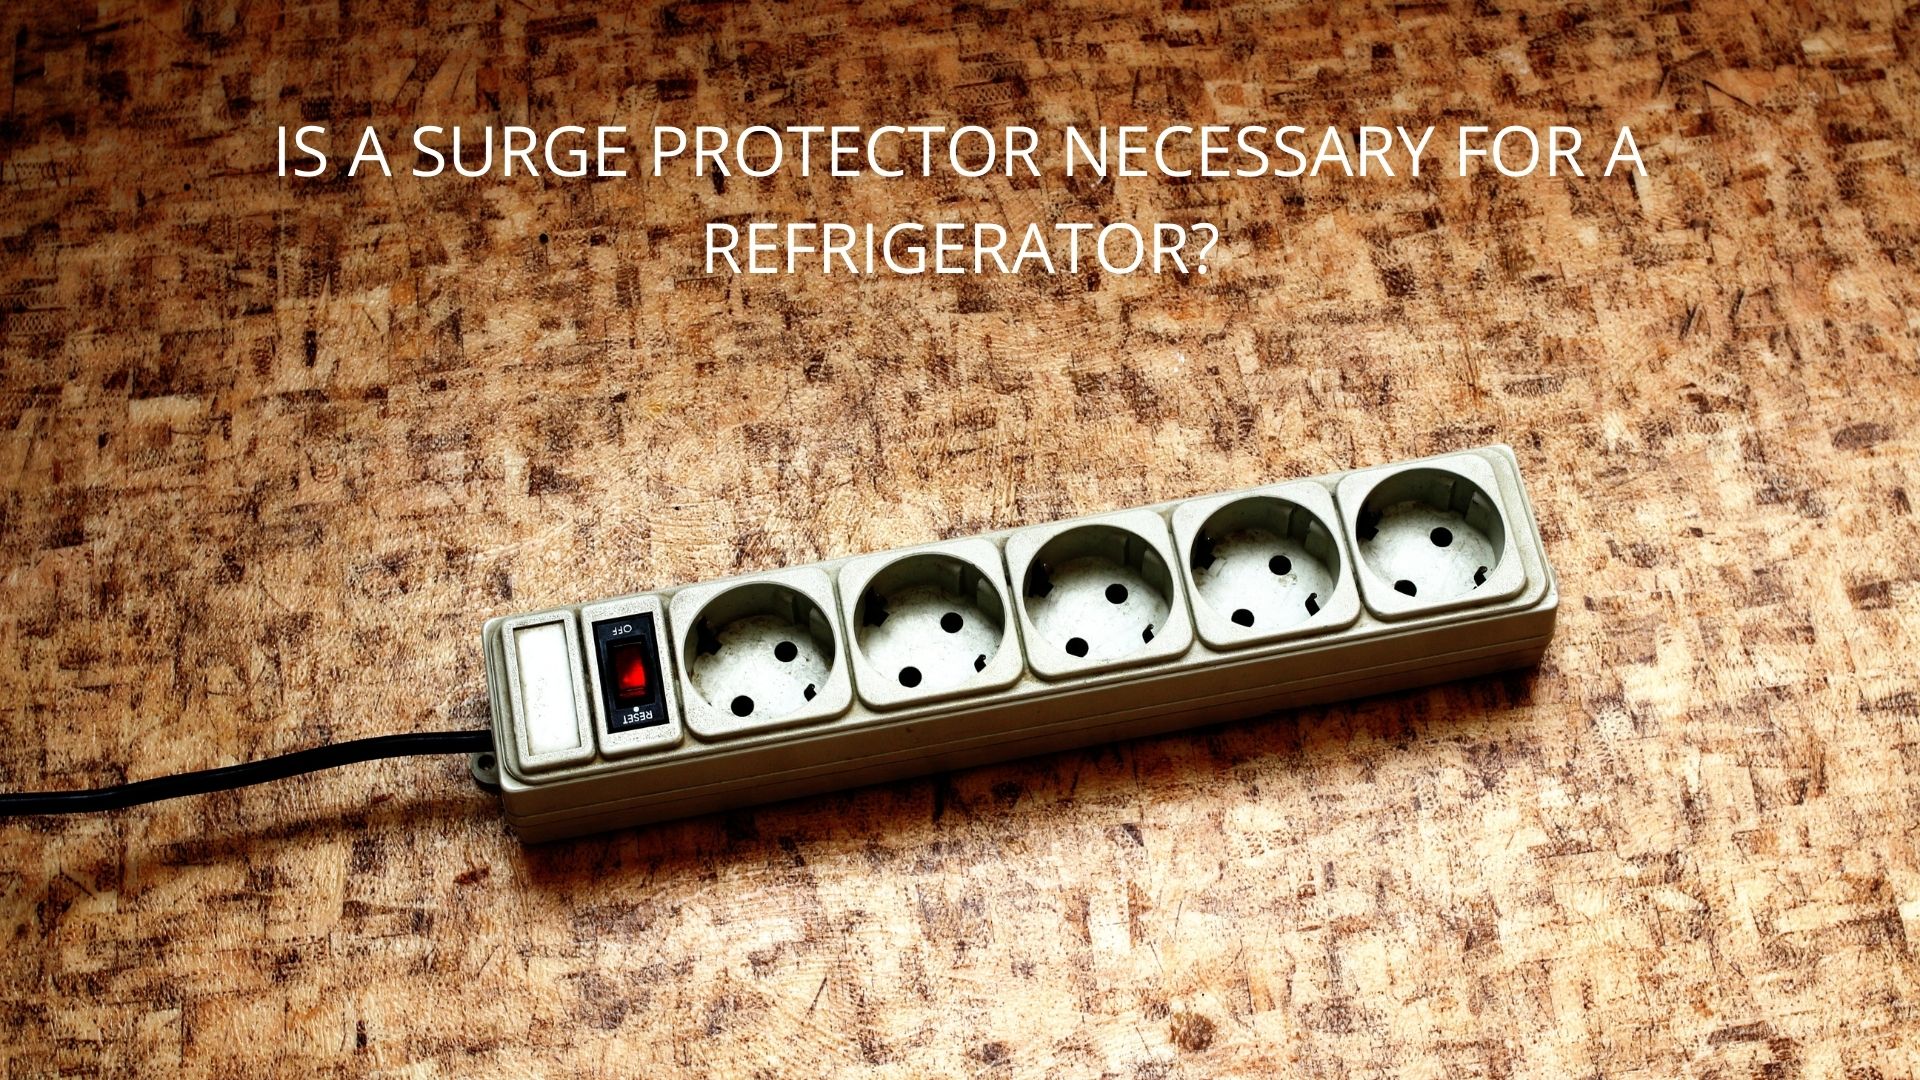 Invest in Safety: Why Your Fridge Needs a Surge Protector - SafetyFrenzy